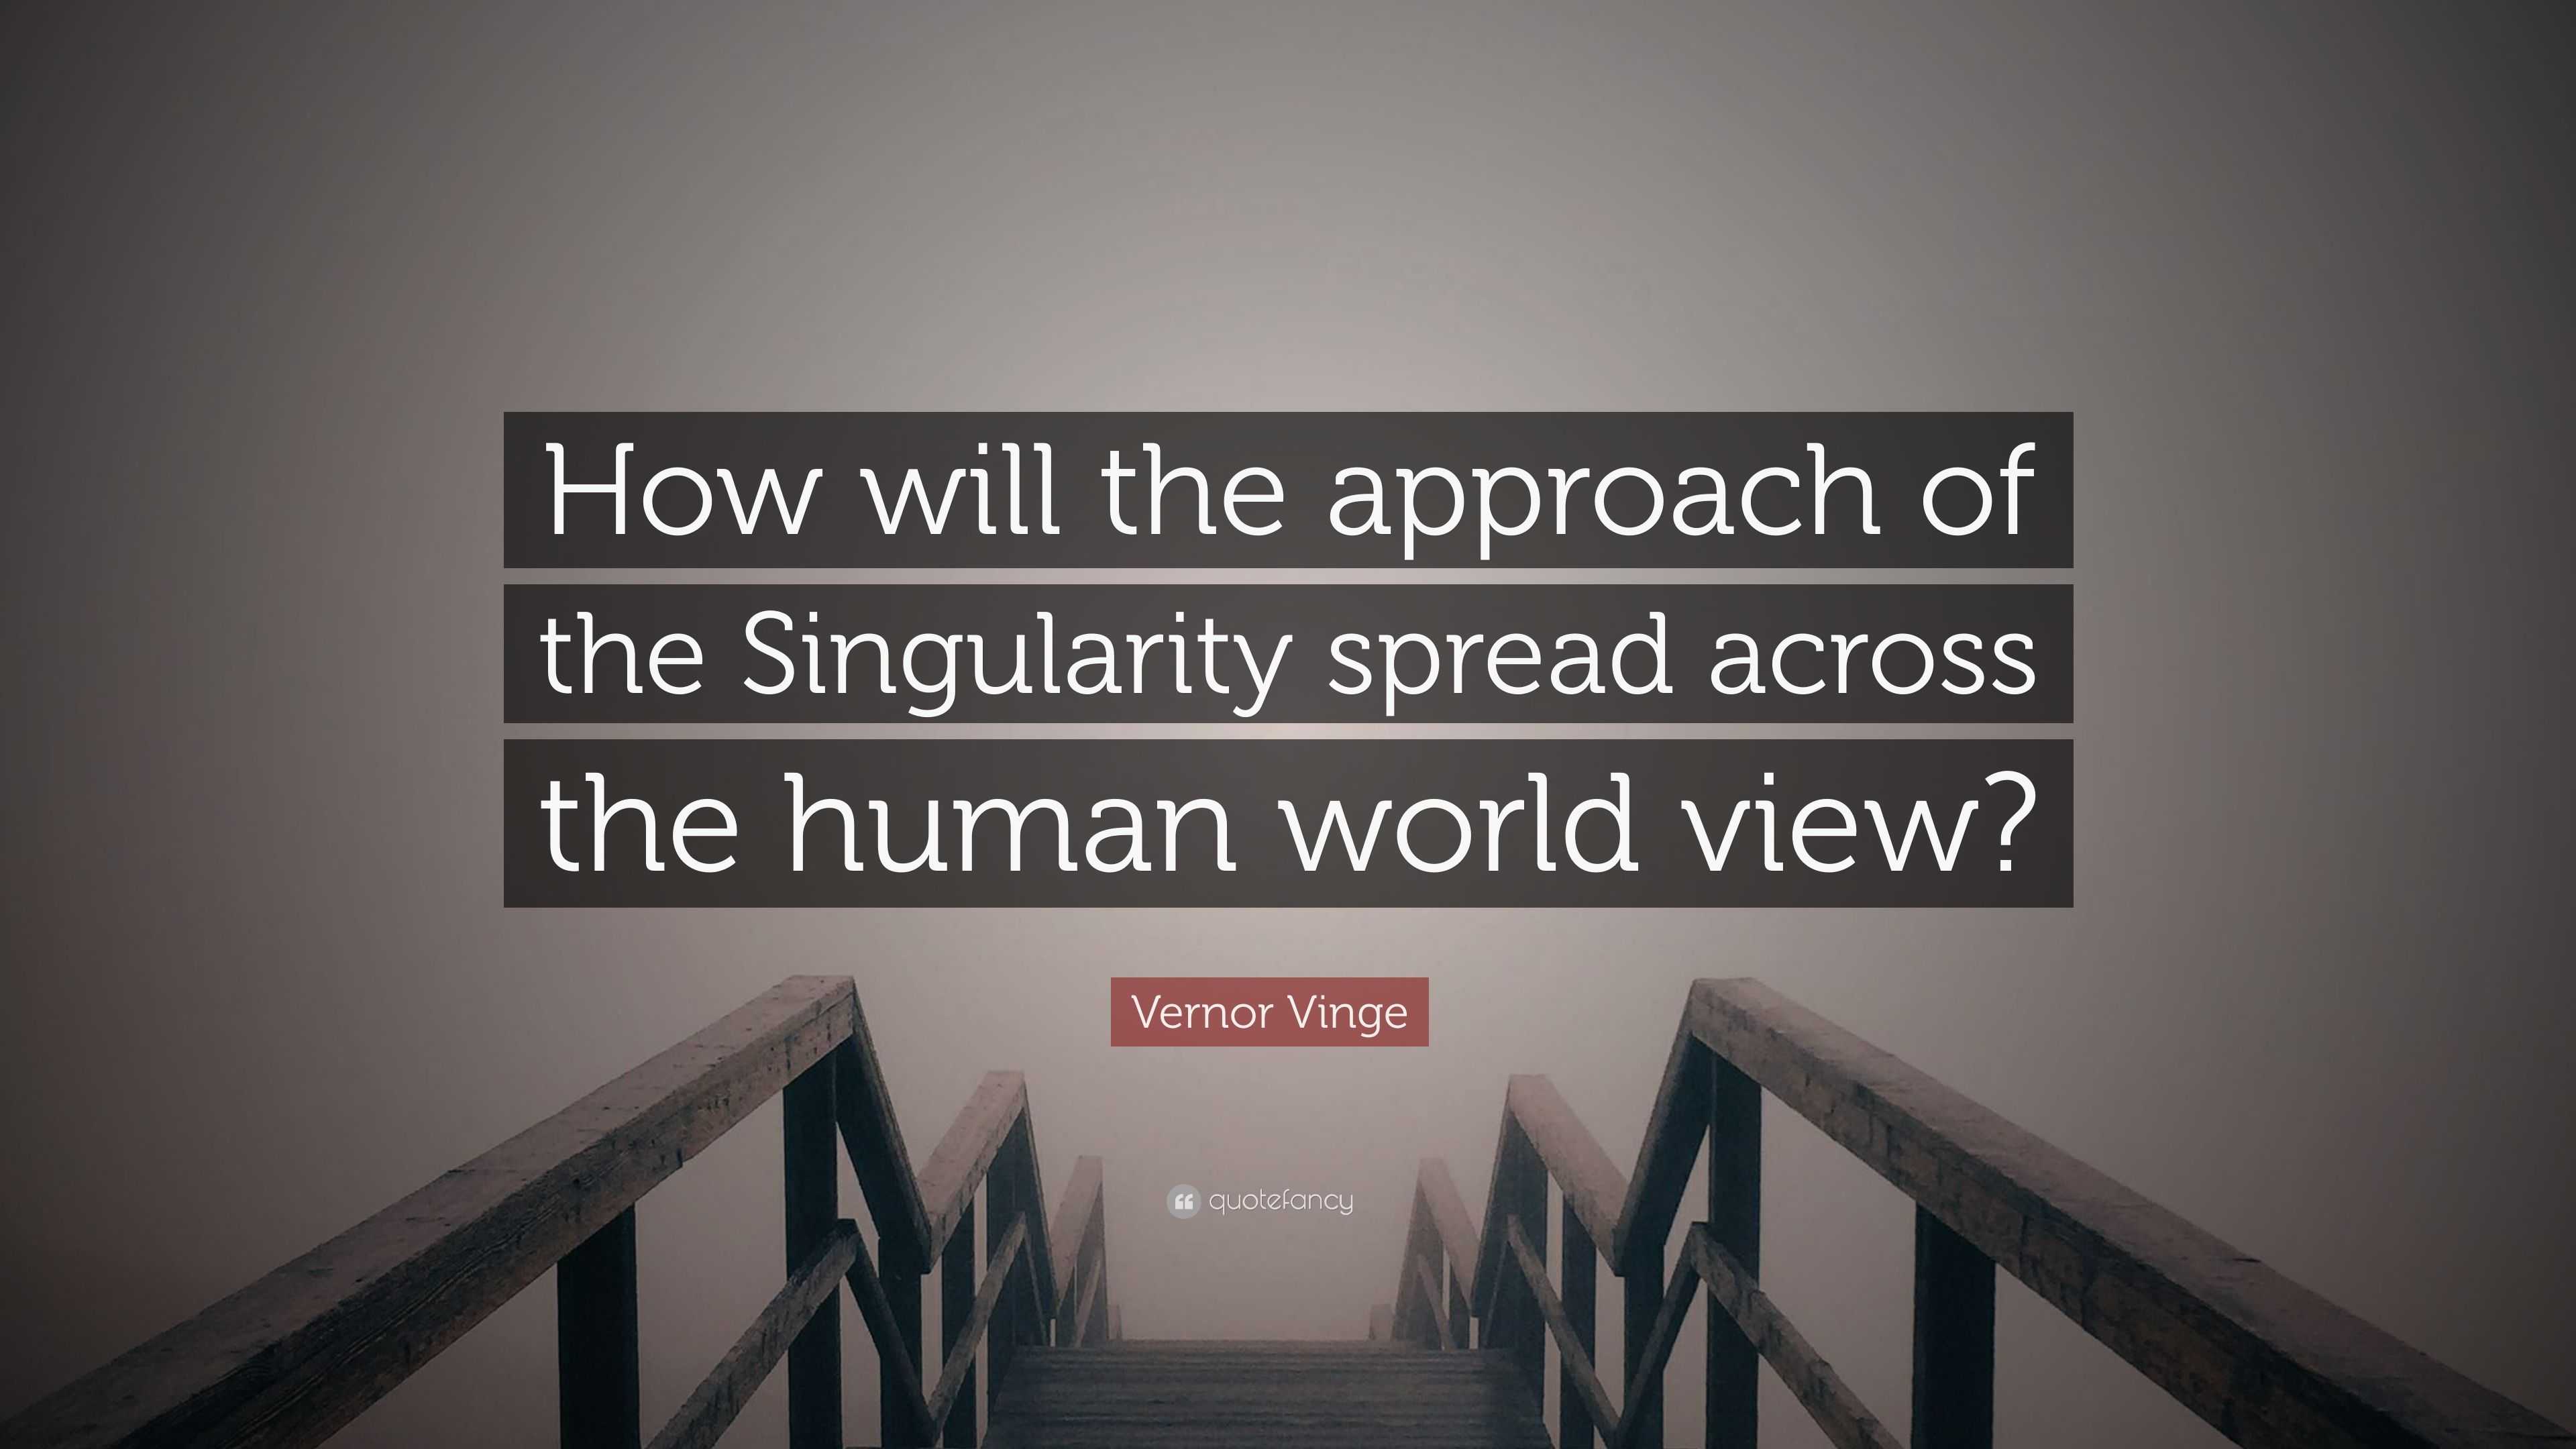 https://quotefancy.com/media/wallpaper/3840x2160/3025827-Vernor-Vinge-Quote-How-will-the-approach-of-the-Singularity-spread.jpg